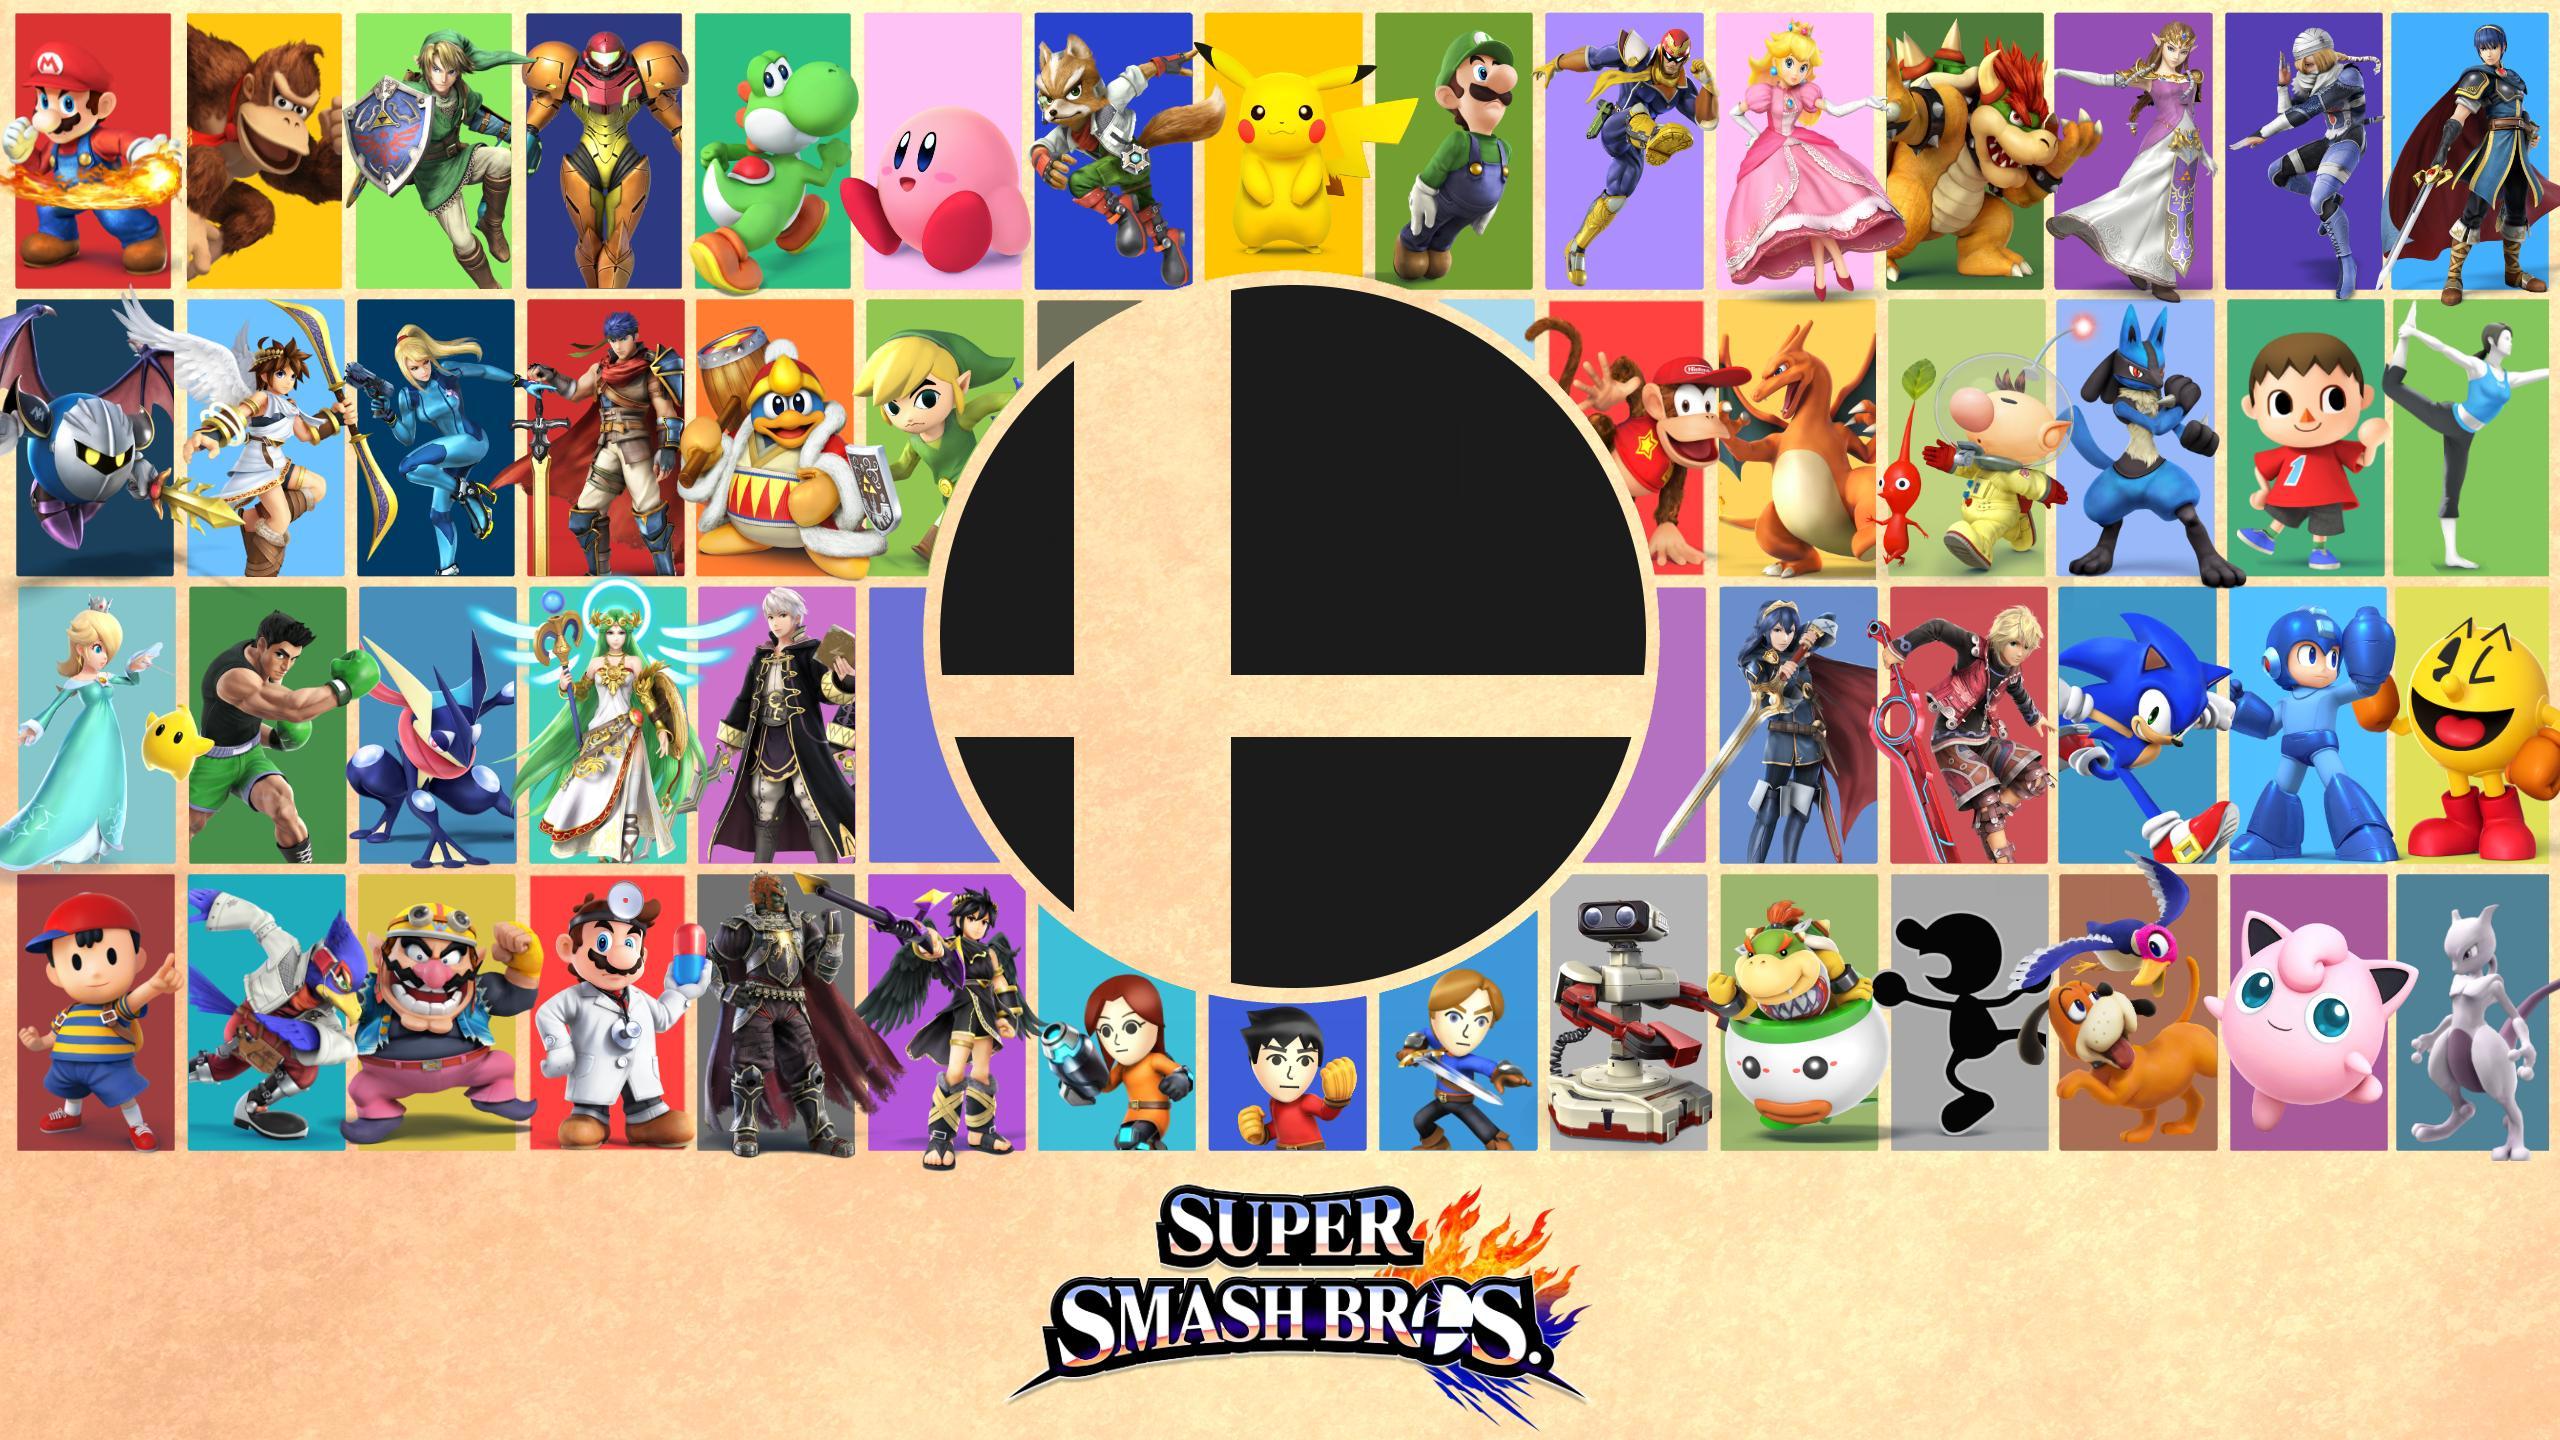 Made A Super Smash Bros Wallpaper Poster Today, Thought You Guys